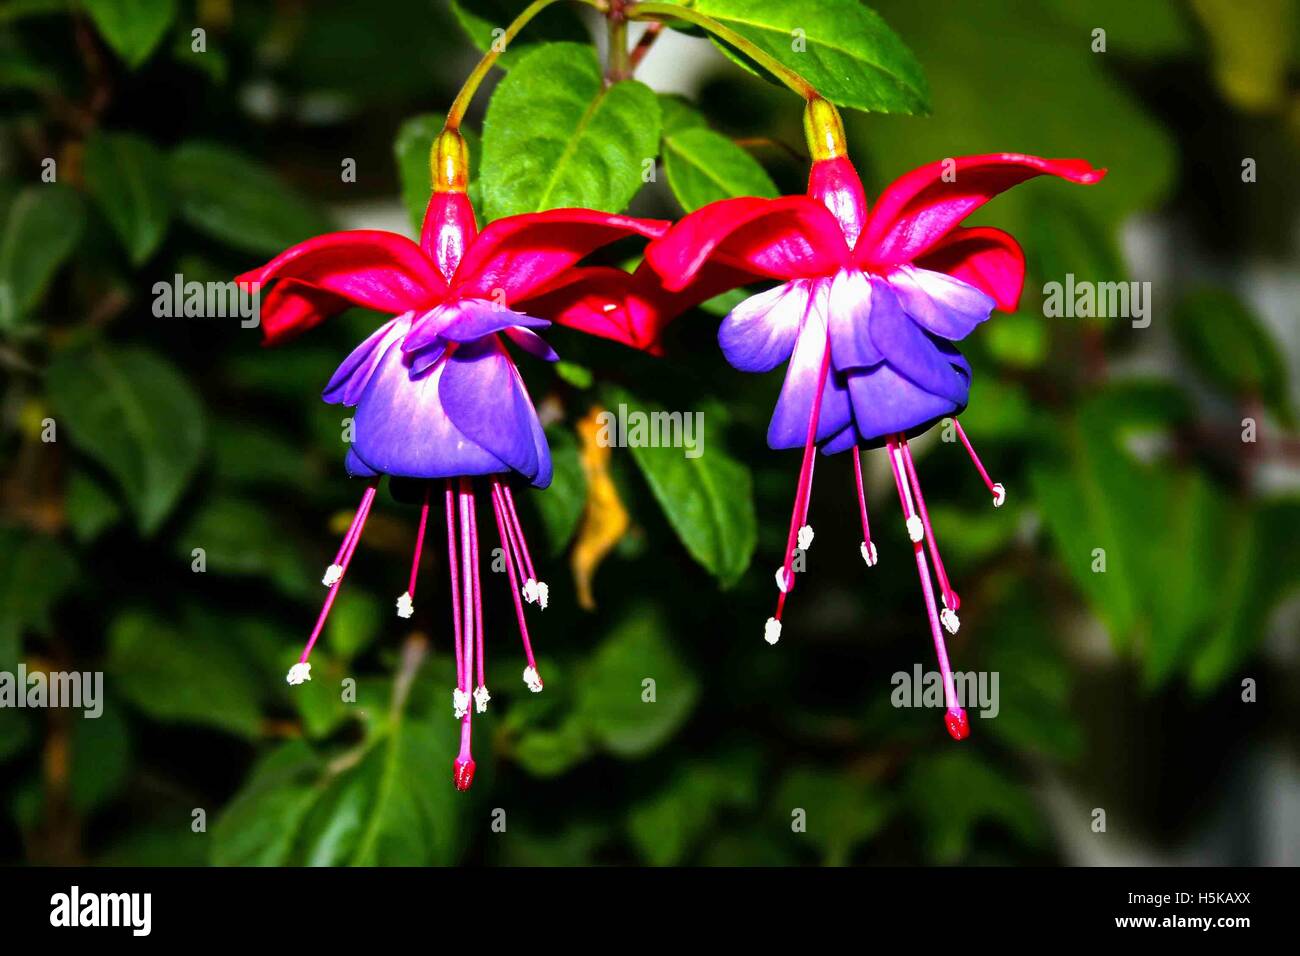 a pair of Fuchsia flowers with a dark background and well lit in pink and mauve Stock Photo